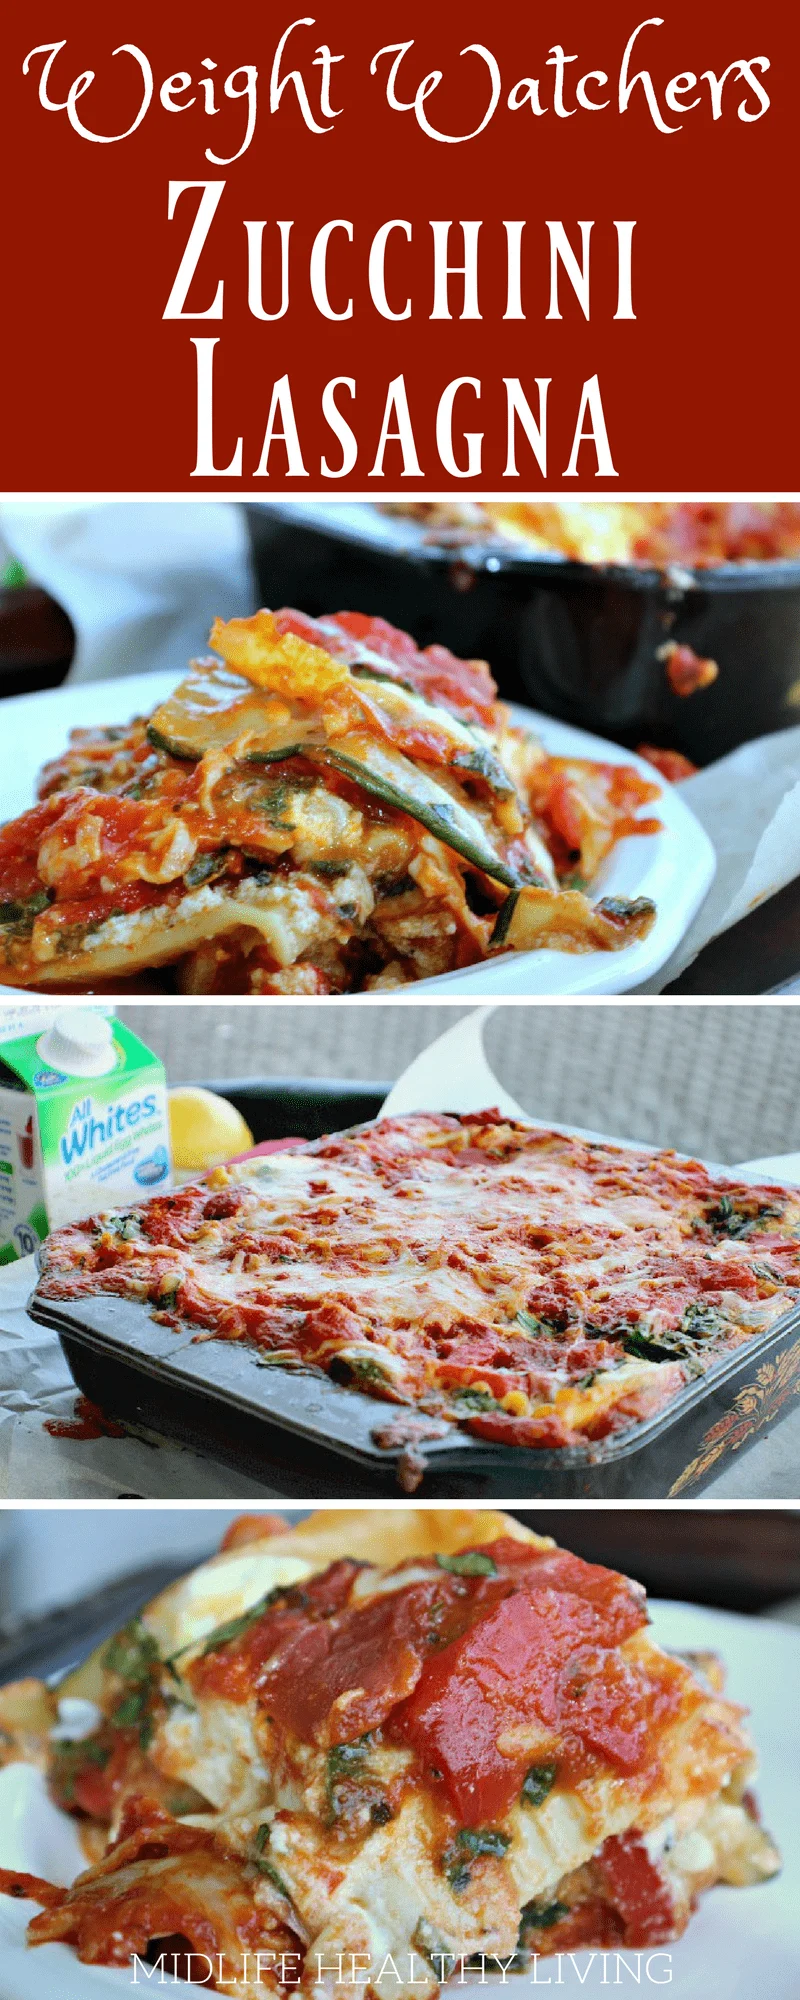 I don't plan on running any marathons anytime soon, but I do plan adding this recipe high-protein Marathoner’s Zucchini Lasagna to my monthly meal plan.